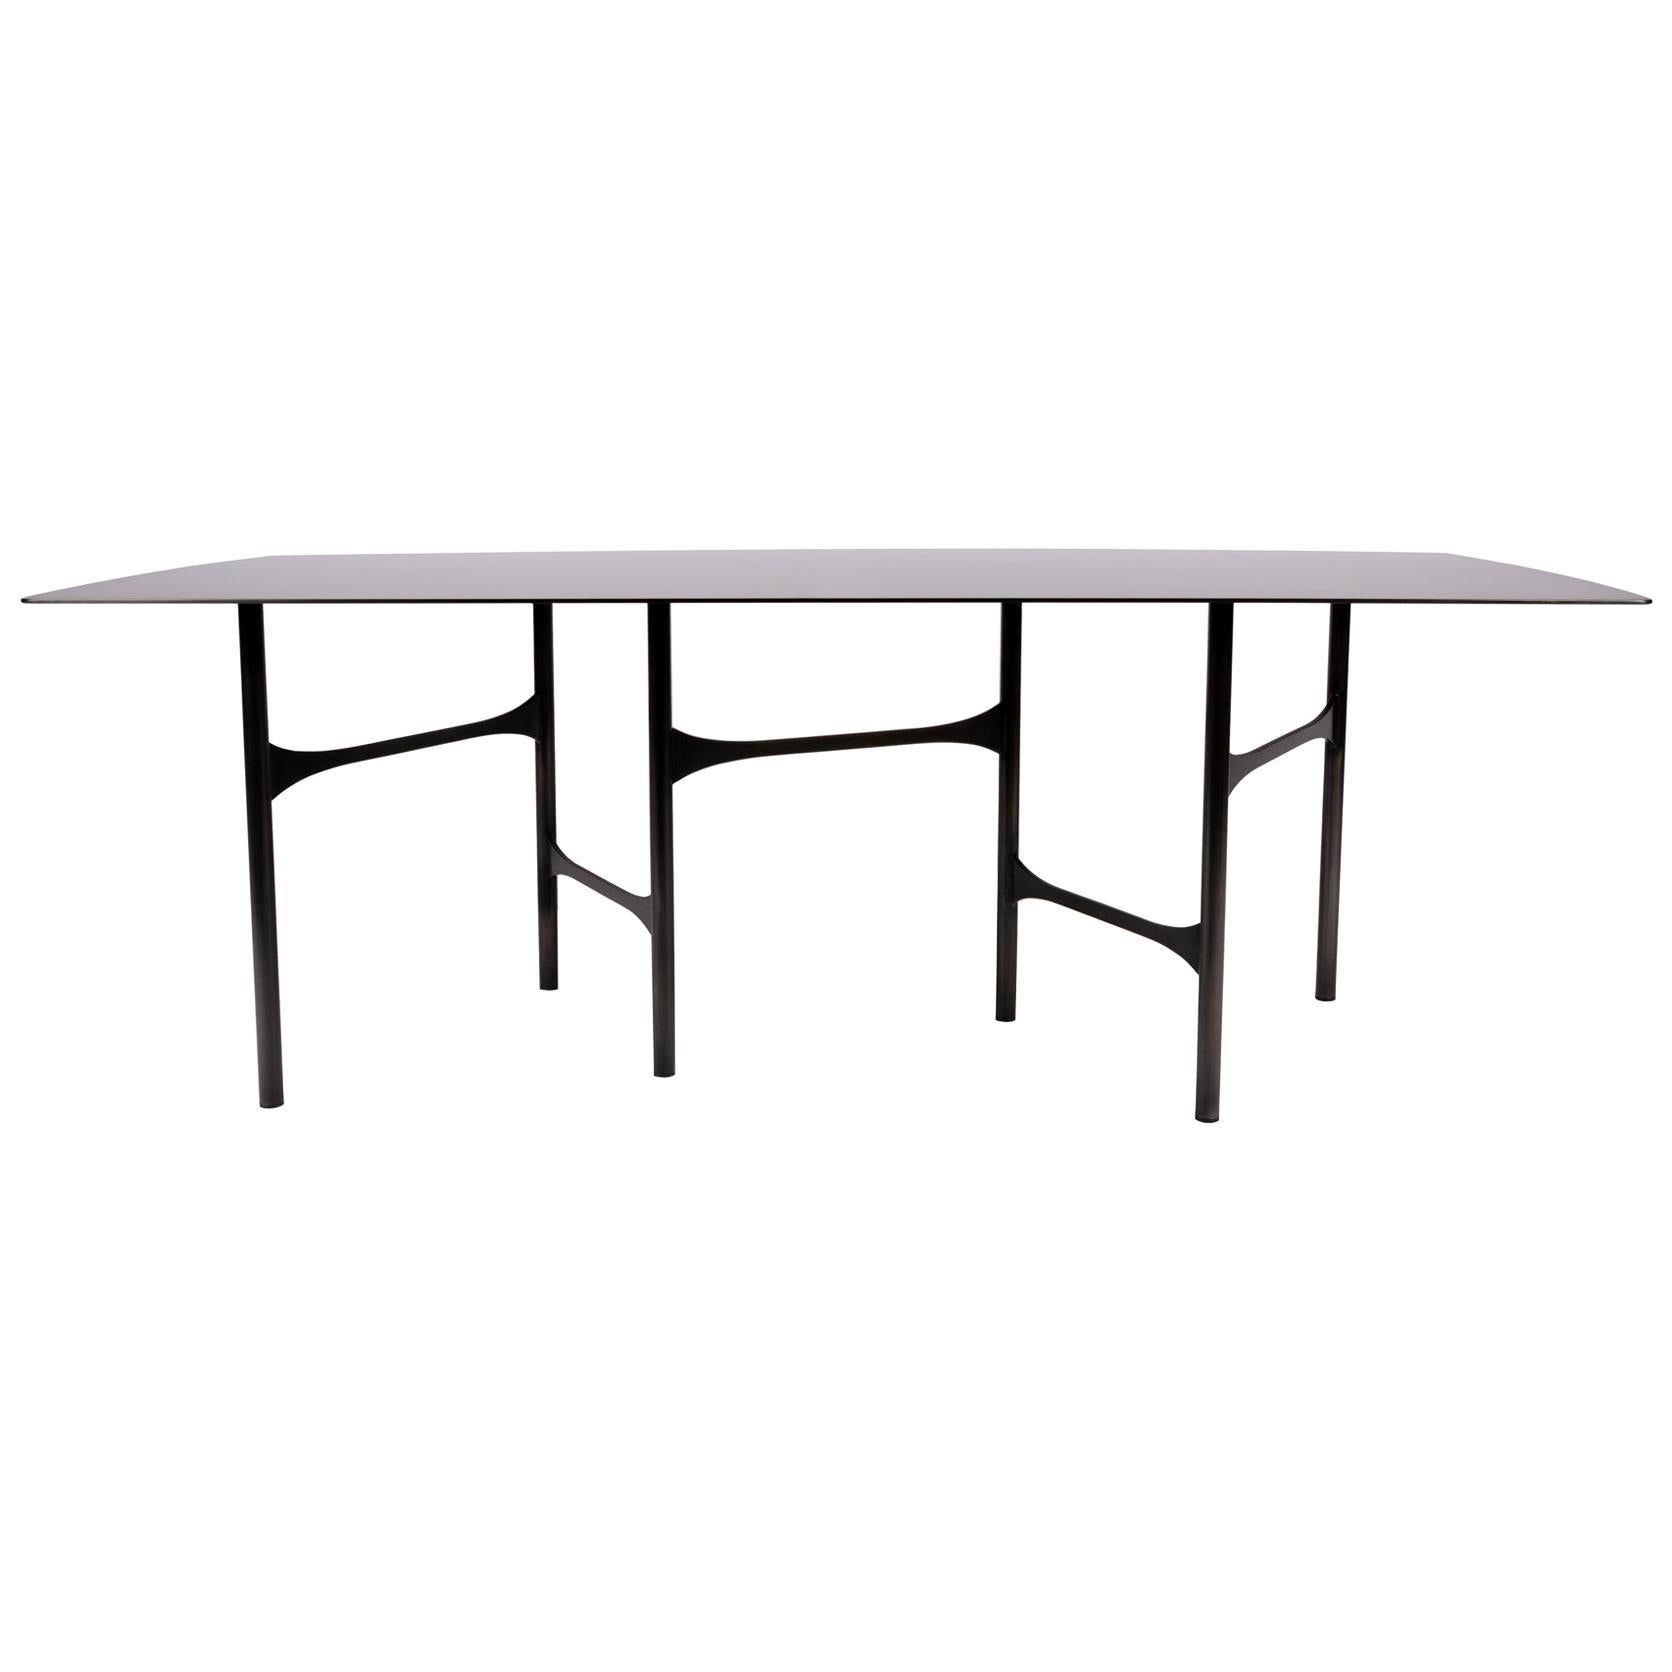 Rectangular Smooth Metal Cross Beam Table in Linear Blackened Finish In Stock